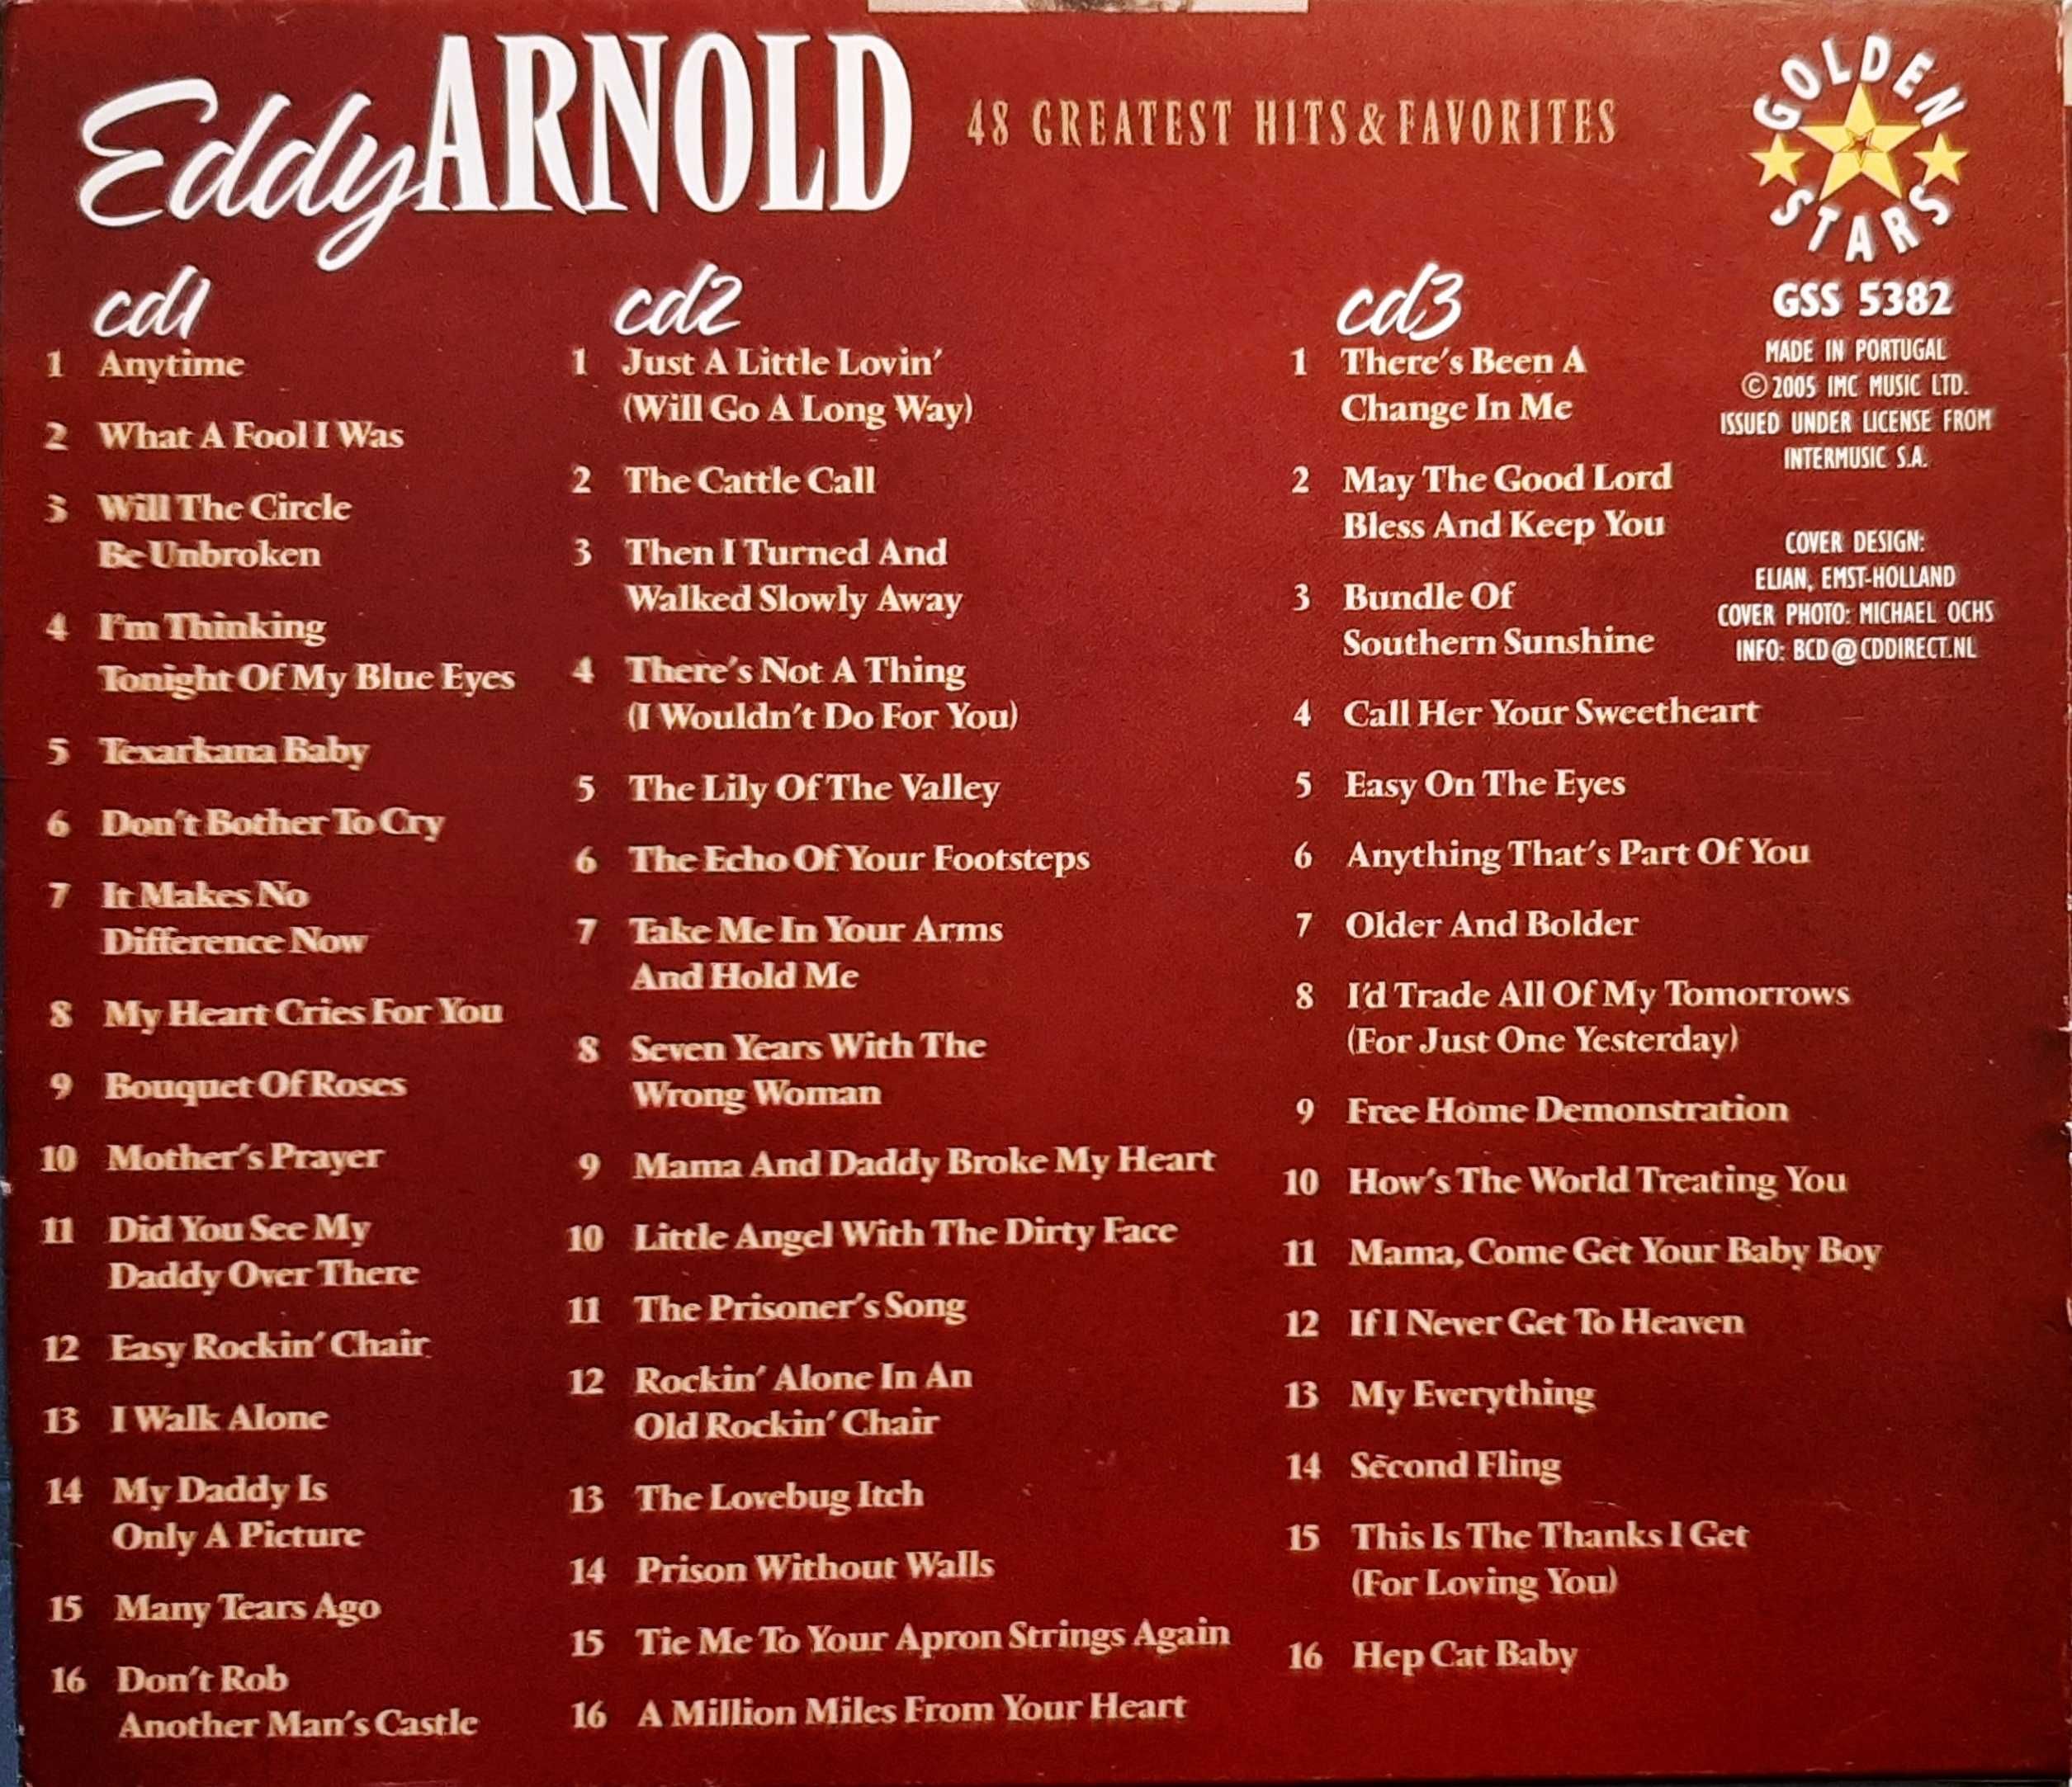 Album 3CD EDDY ARNOLD How's The World Treating You - nowy